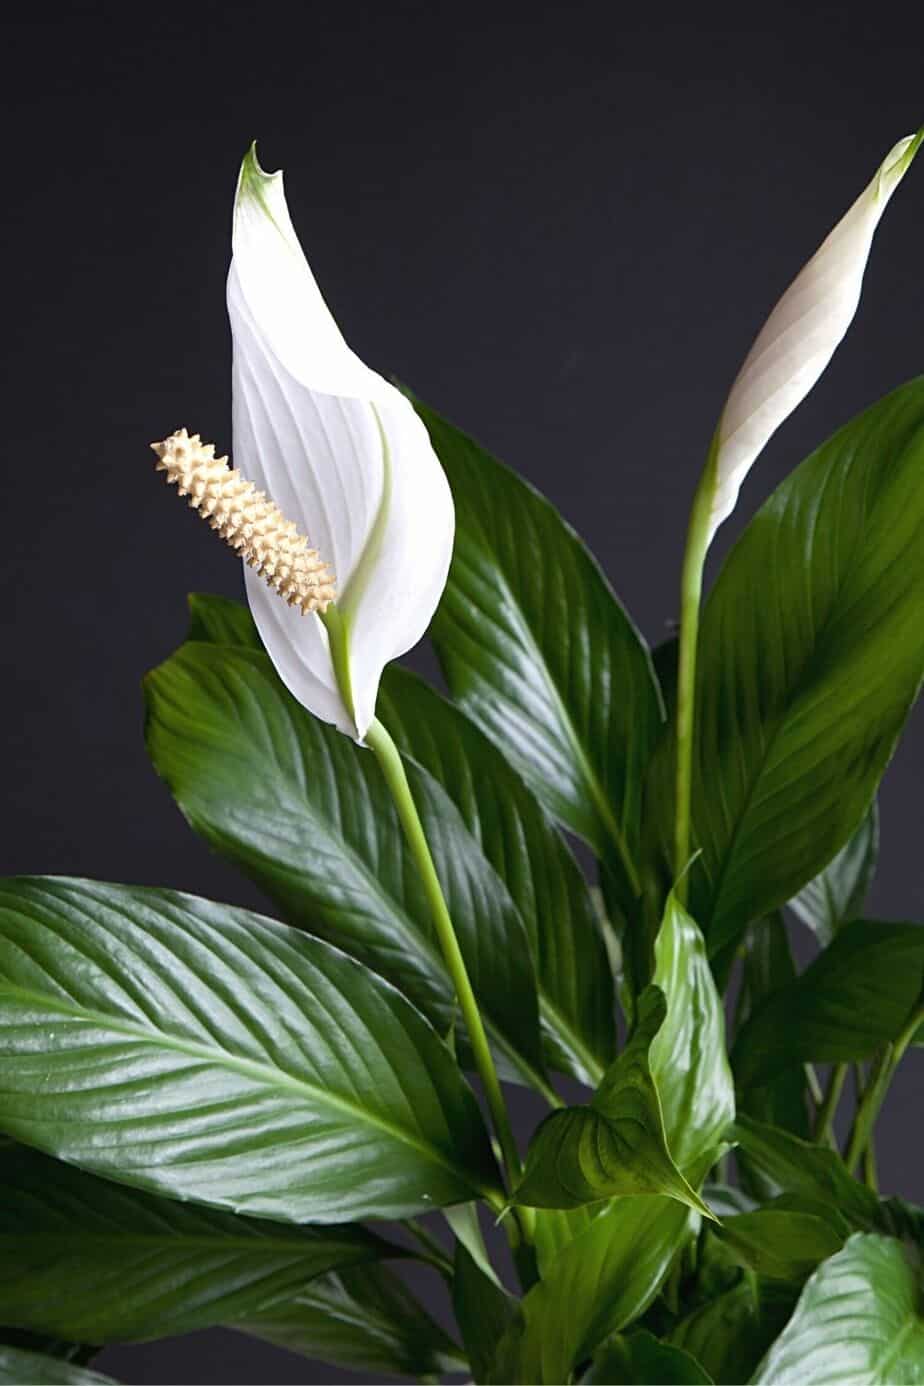 Mauna Loa Peace Lily, like Philodendron, contains oxalates that are toxic for cats